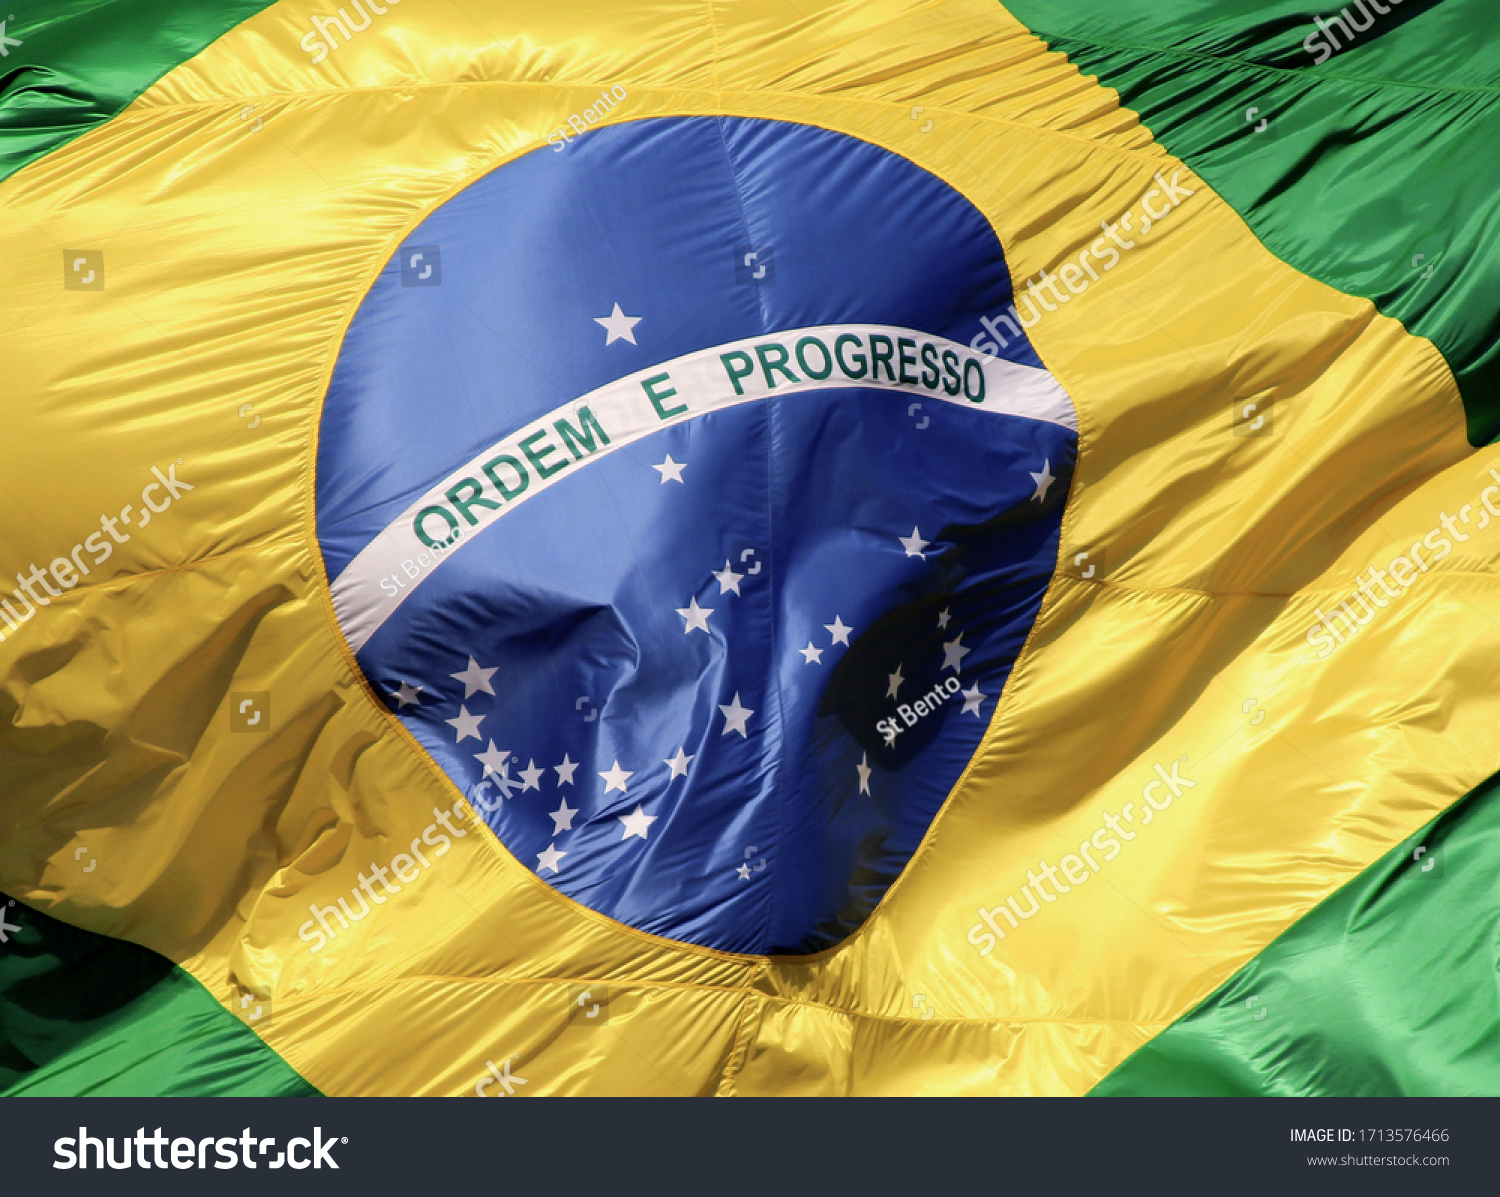 Flag of Brazil moved by the wind in the sky #1713576466